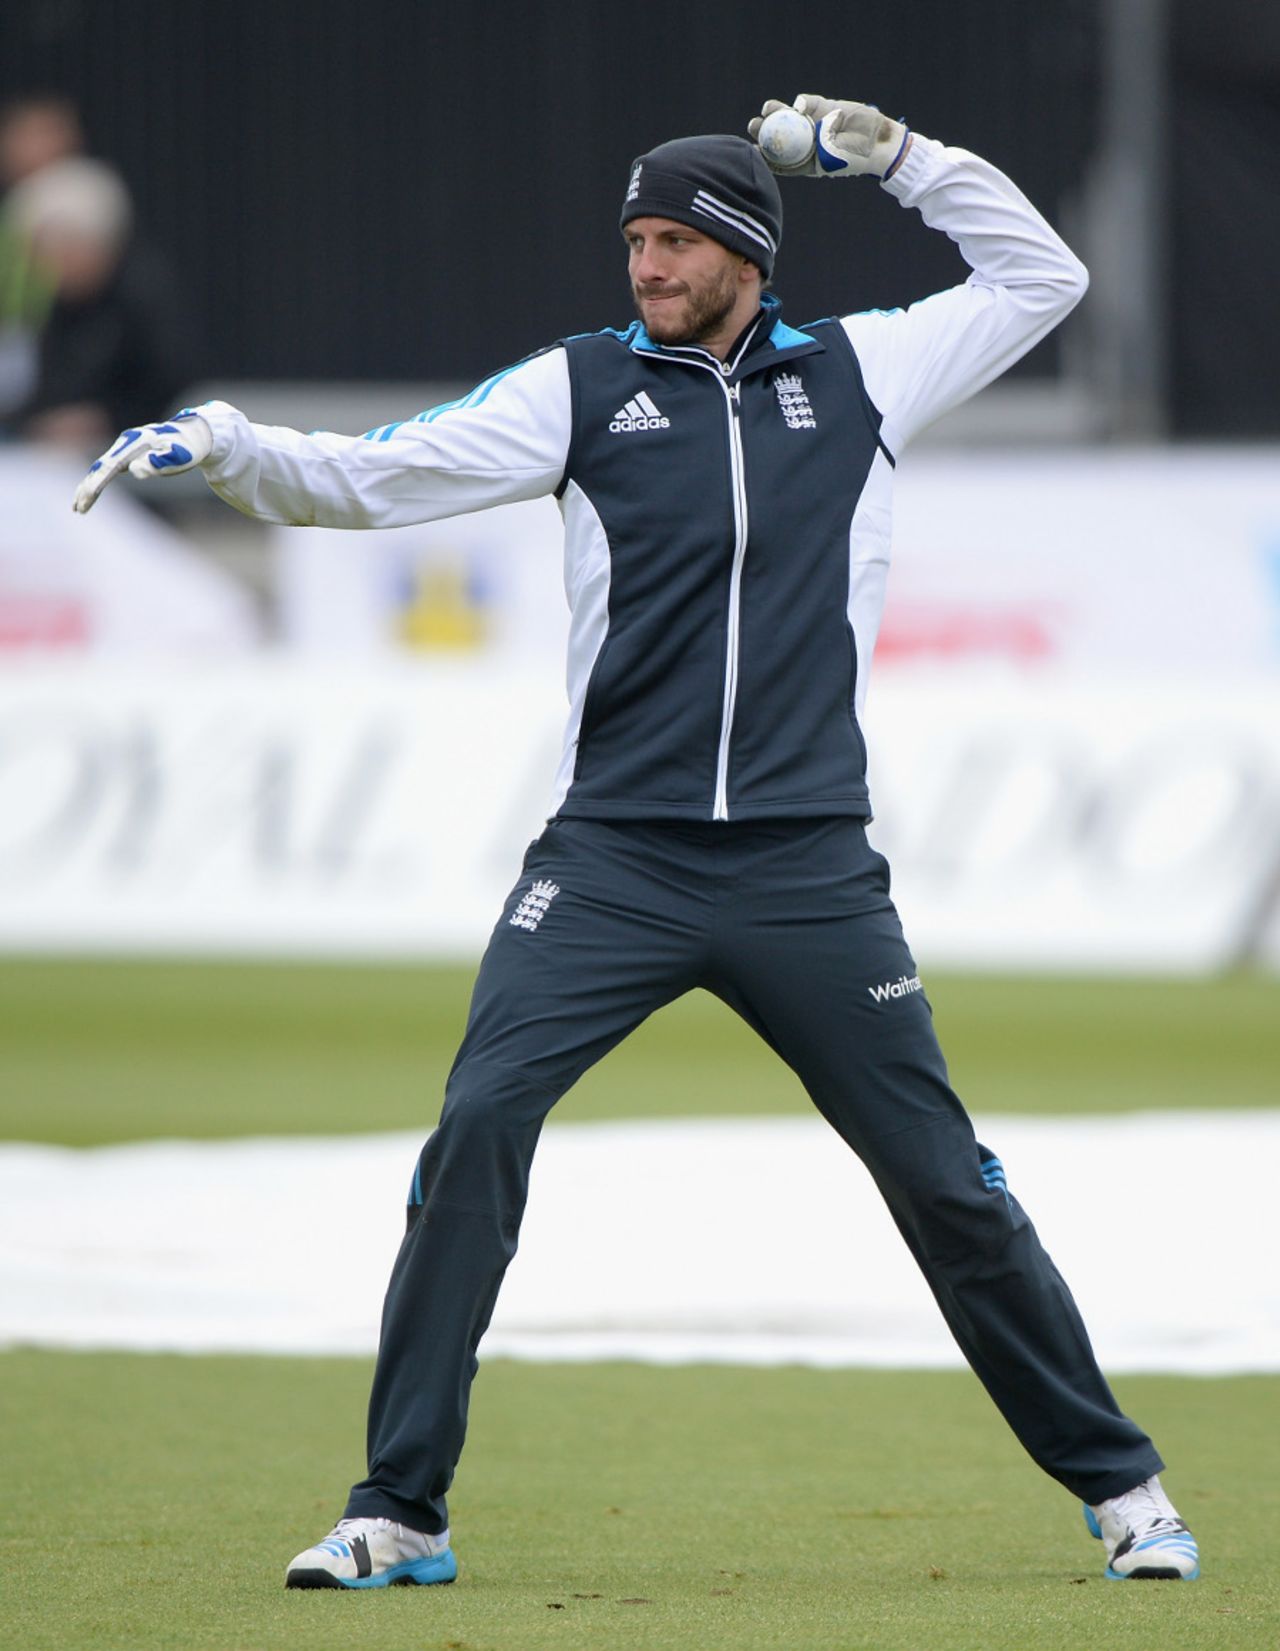 It was a hat and glove weather for some of England's players, including Harry Gurney, Chester-le-Street, May 24, 2014